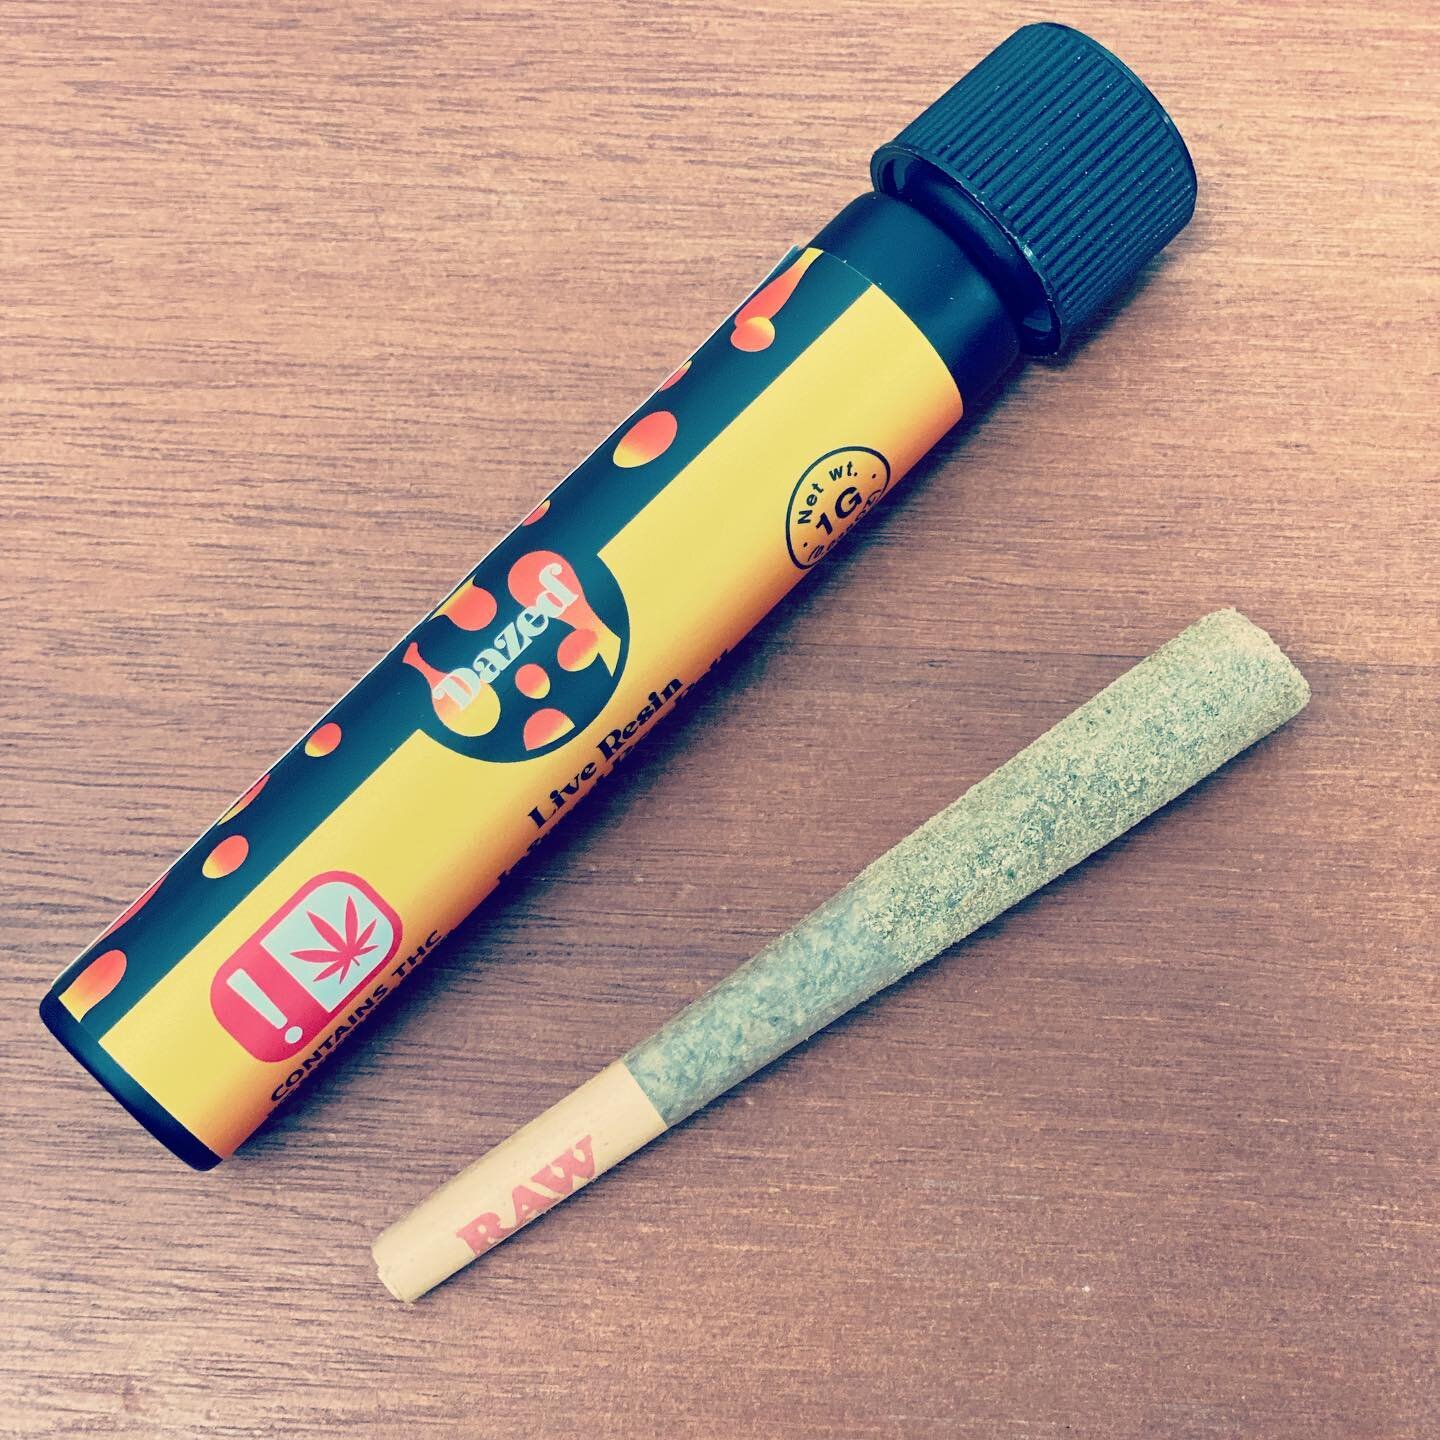 😎 Do you love Dazed pre-rolls? Tell us about it 😄